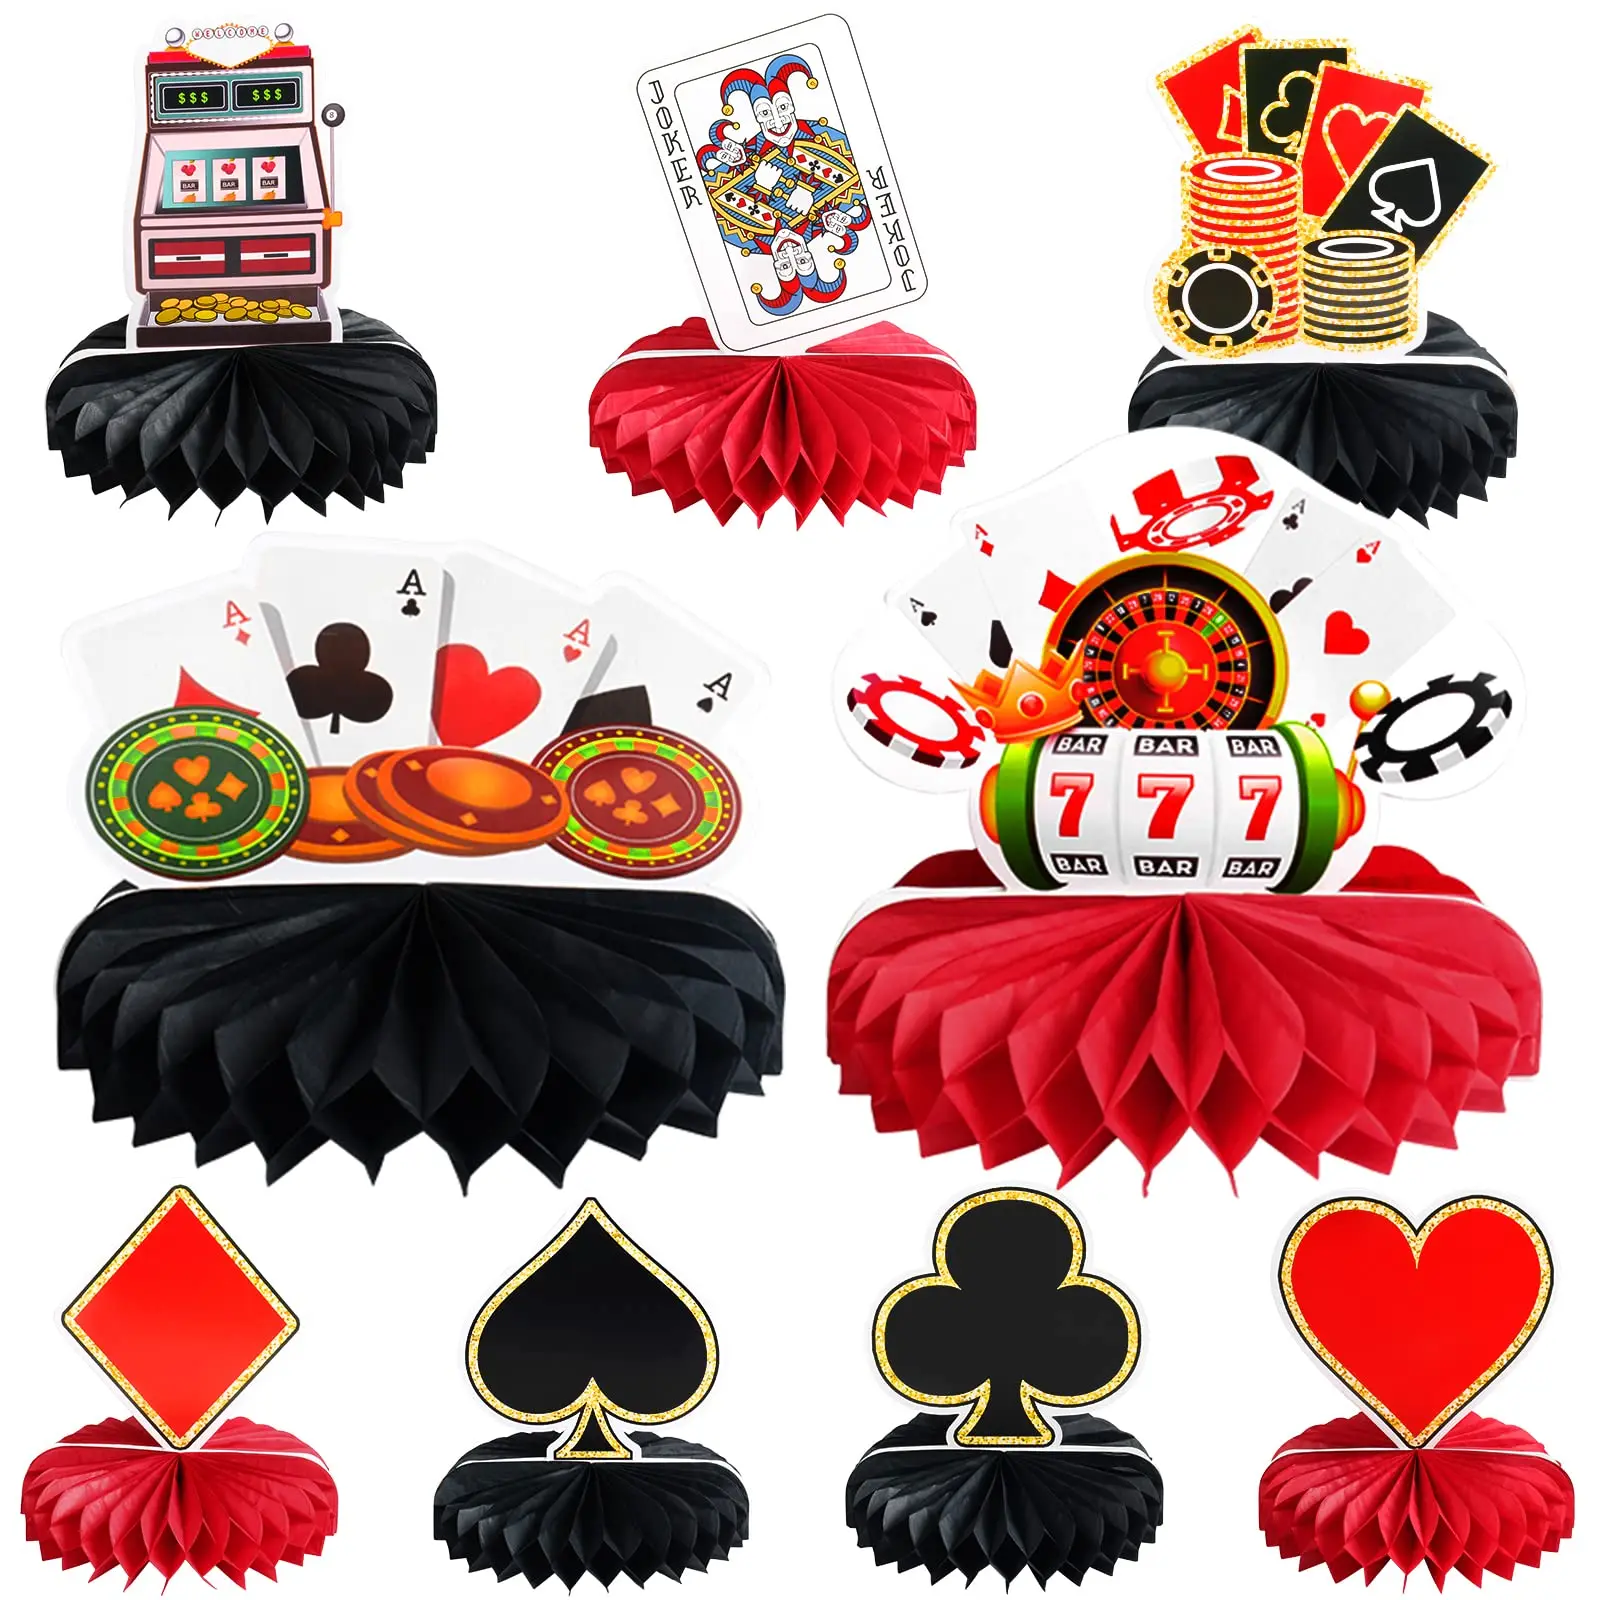 

9 Pcs Casino Theme Party Decor 3D Honeycomb Casino Table Centerpieces Game Night Favor Casino Poker Red Black Birthday Supplies